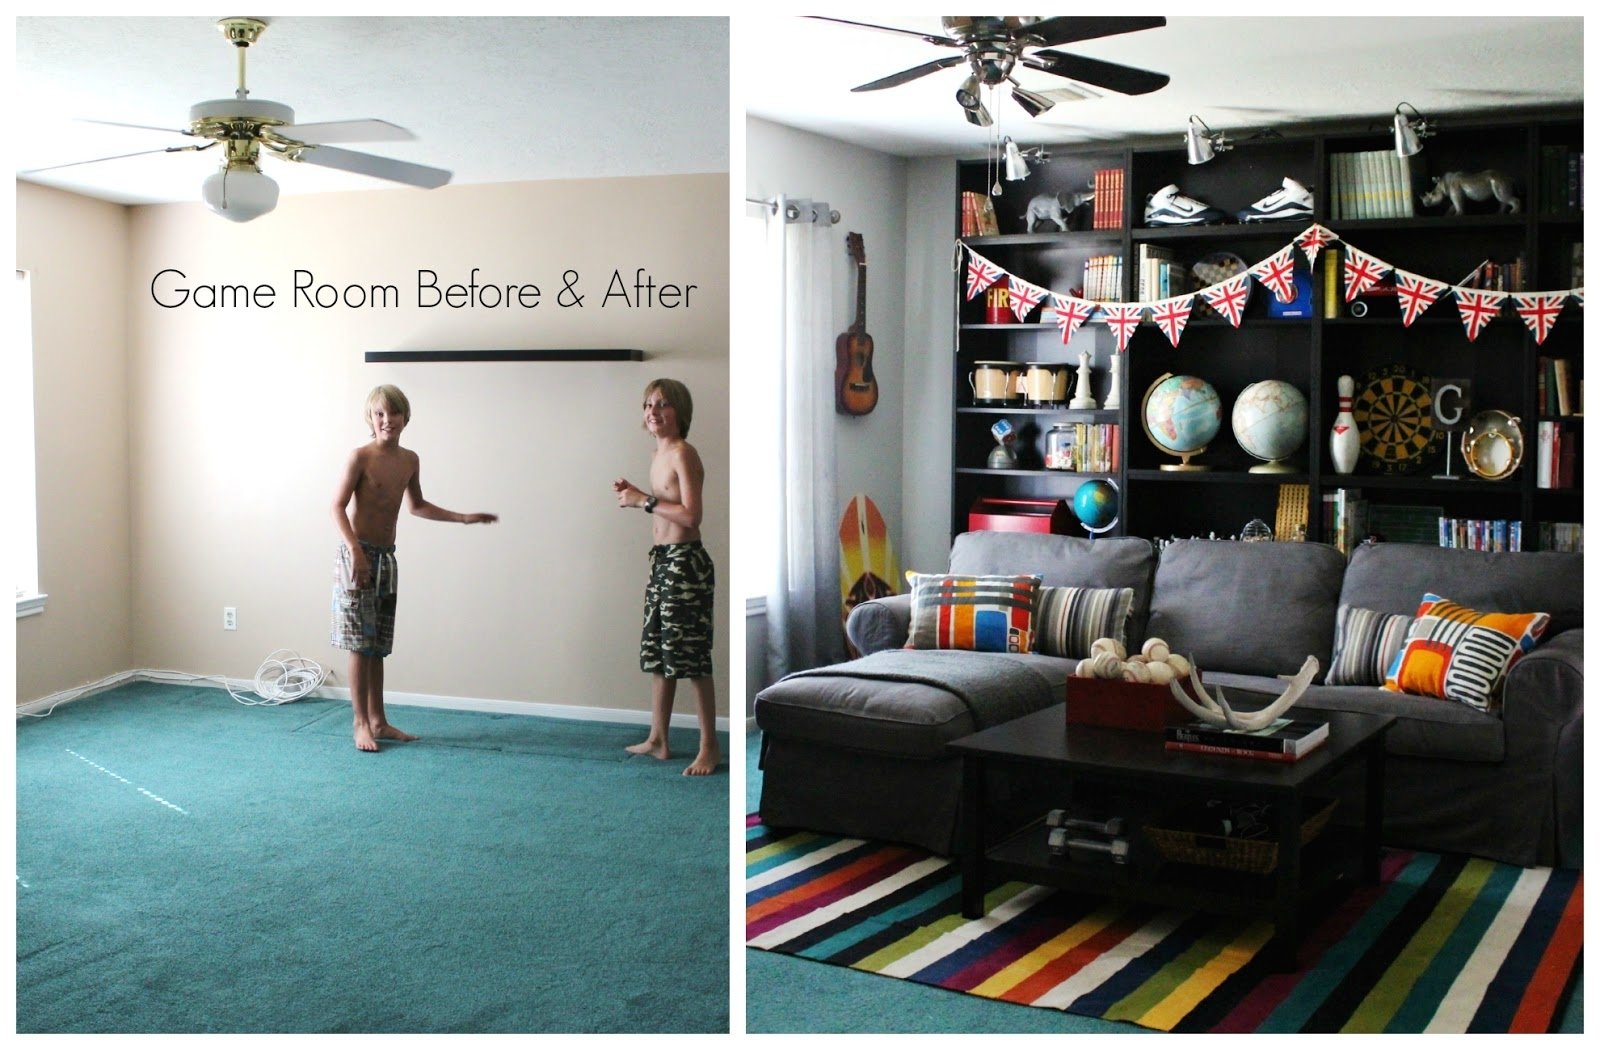 10 Gorgeous Game Room Ideas For Kids kids game room ideas rooms for and f home design pictures fun 2022